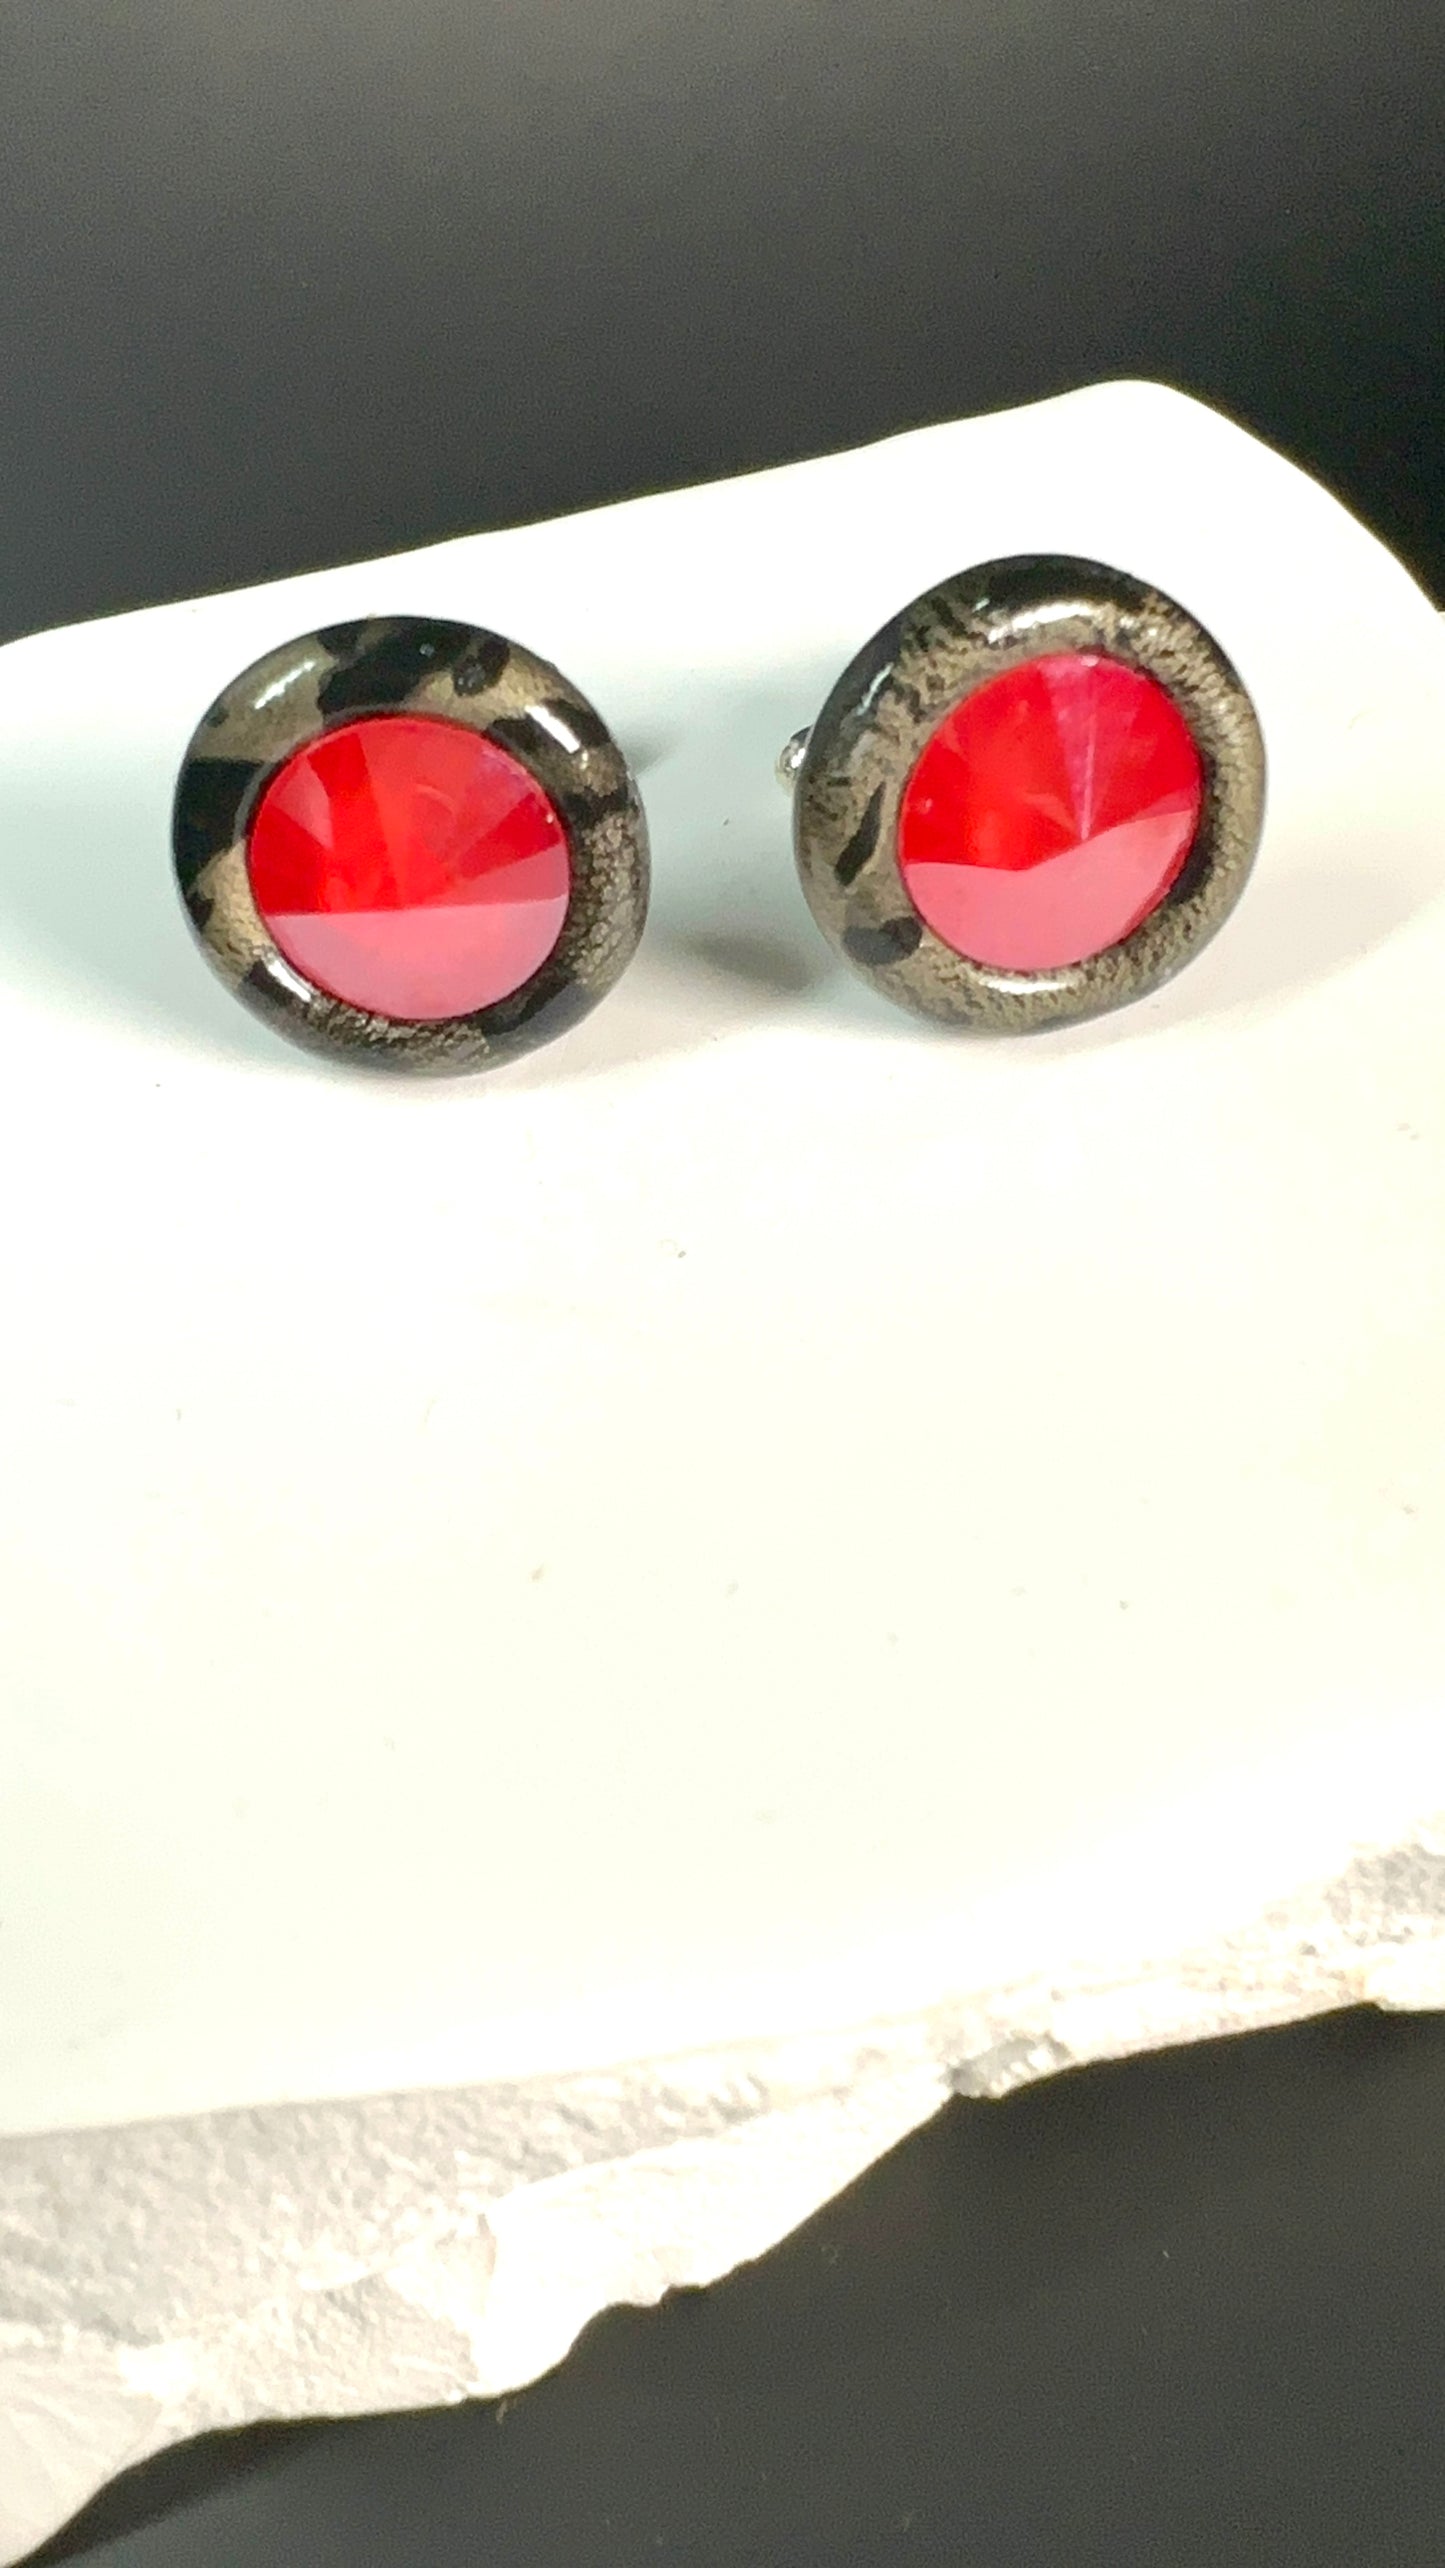 The "Red Leopard" Cuff Links